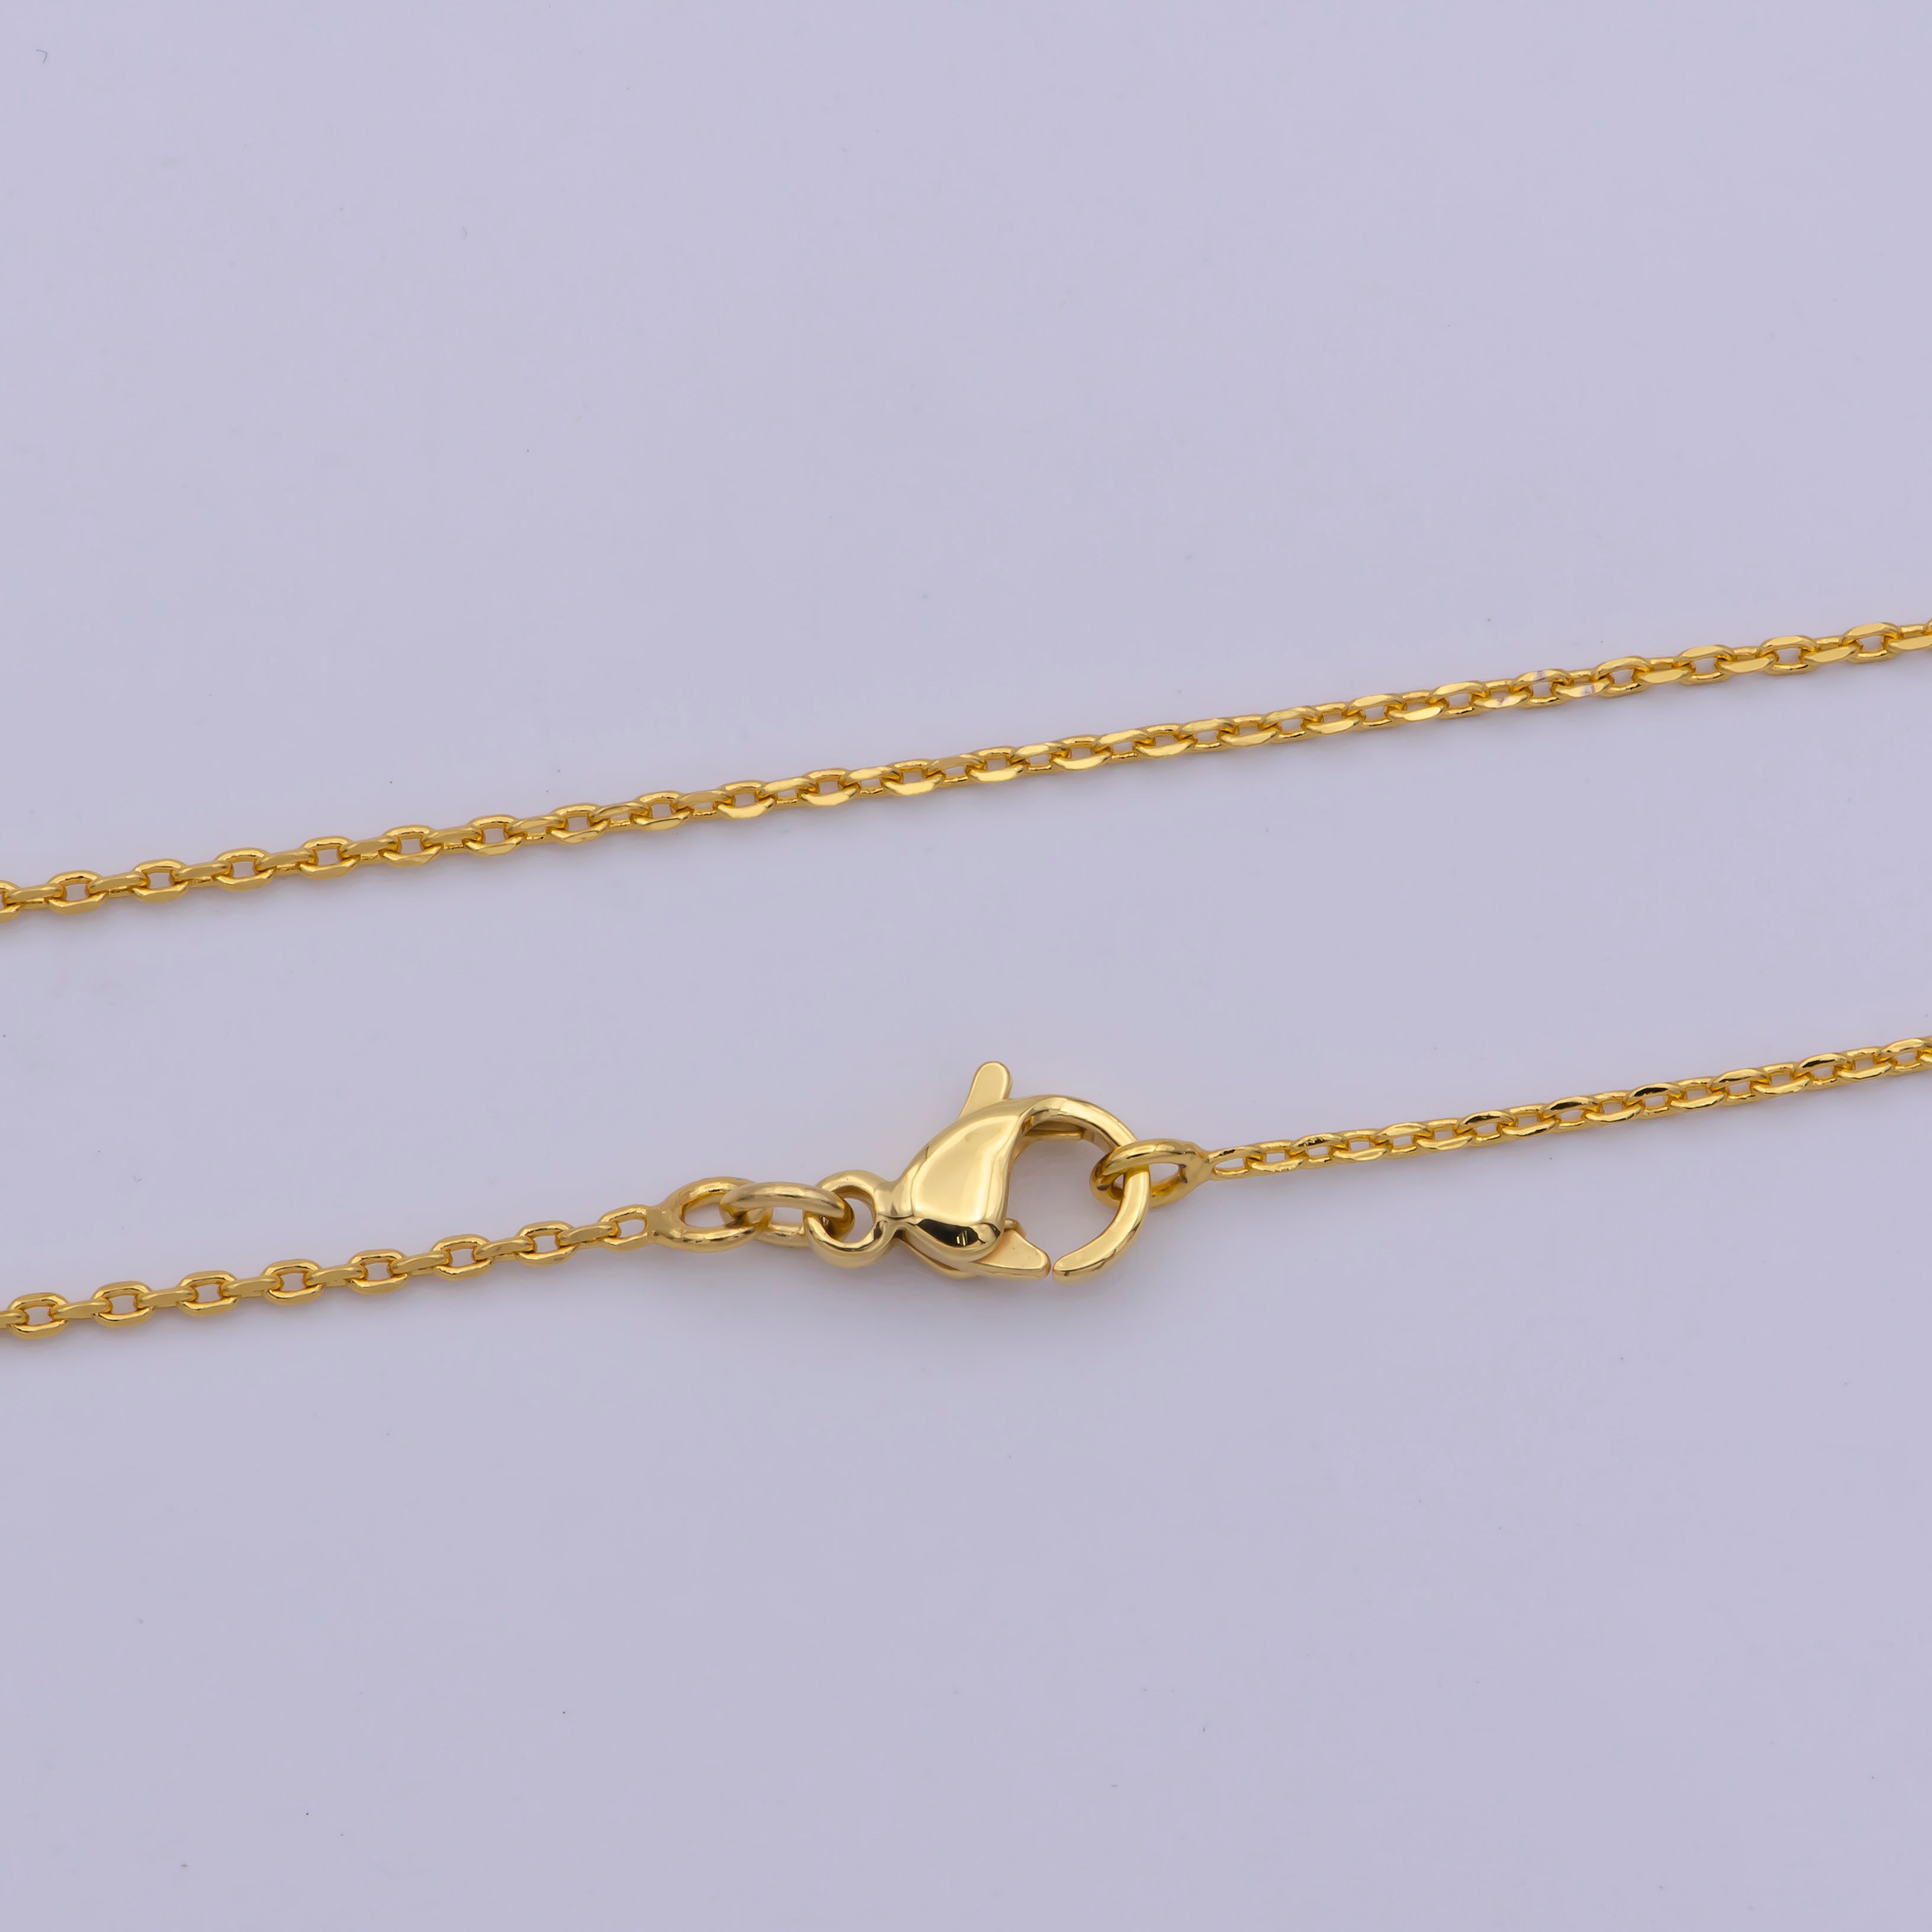 24K Gold Filled Cable Chain Necklace, 17.5 Inch Cable Chain Necklace, Dainty 1mm Link Necklace | WA-467 - DLUXCA